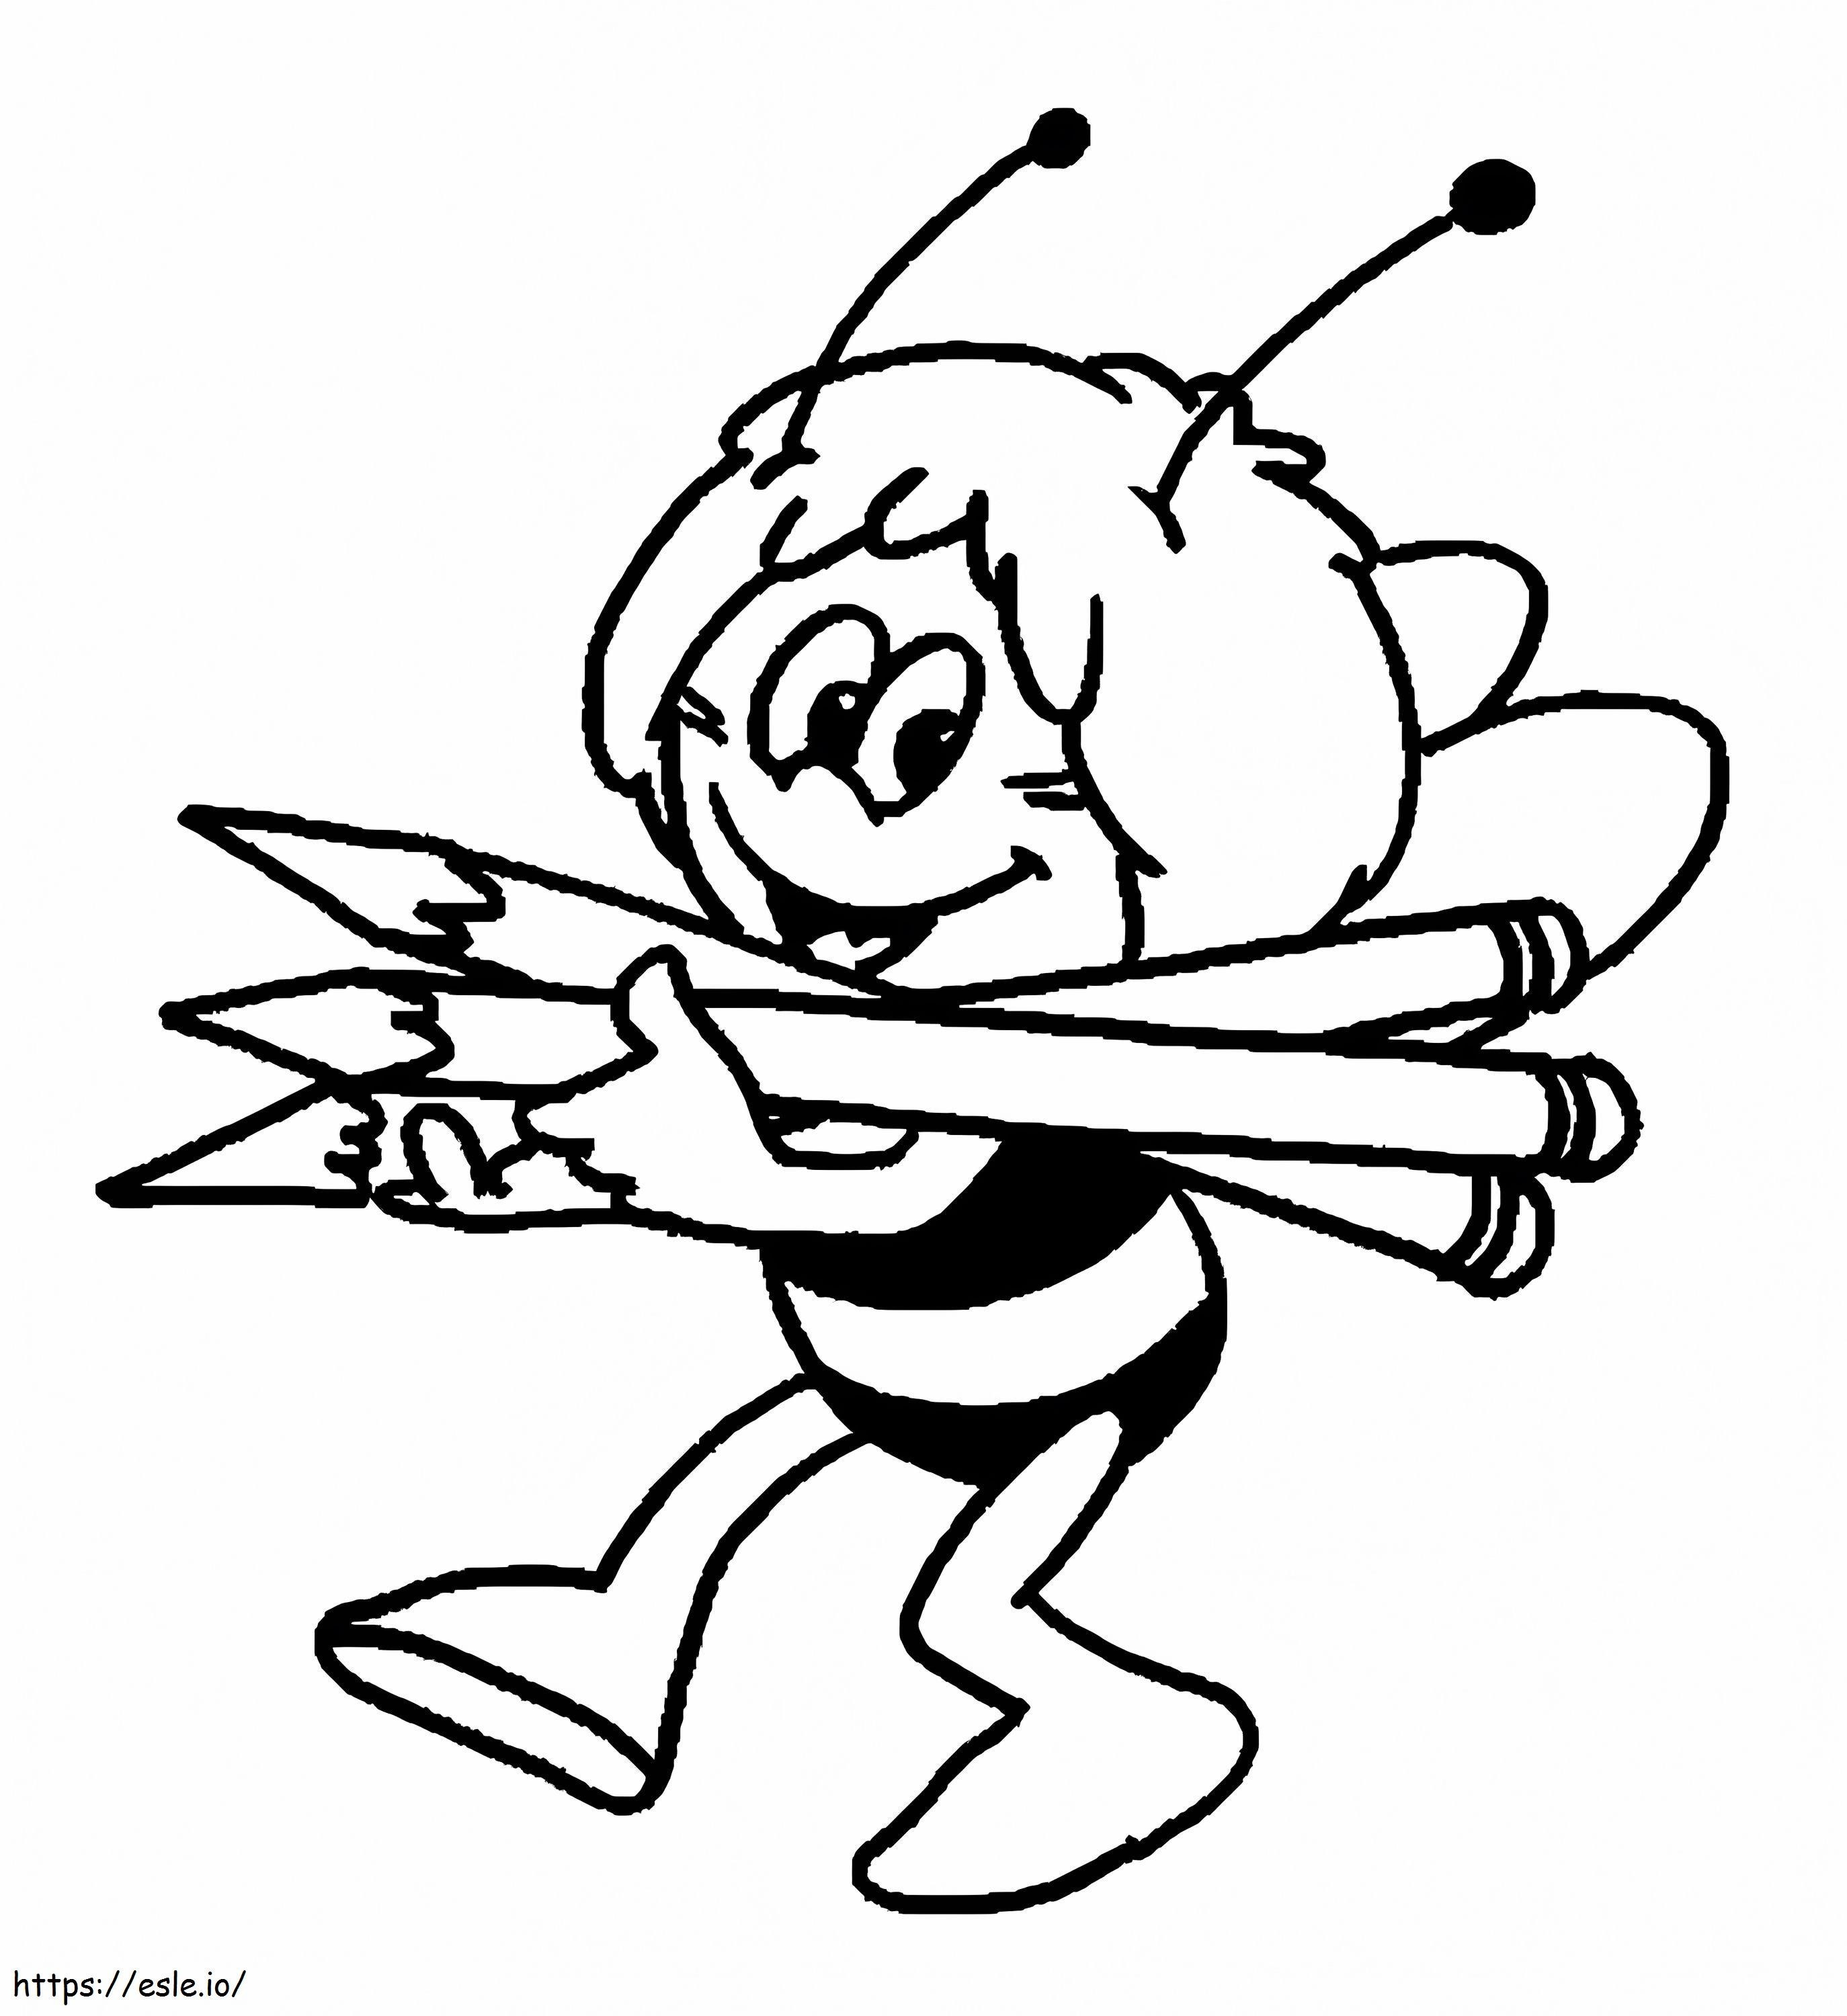 Bee And Pencil coloring page